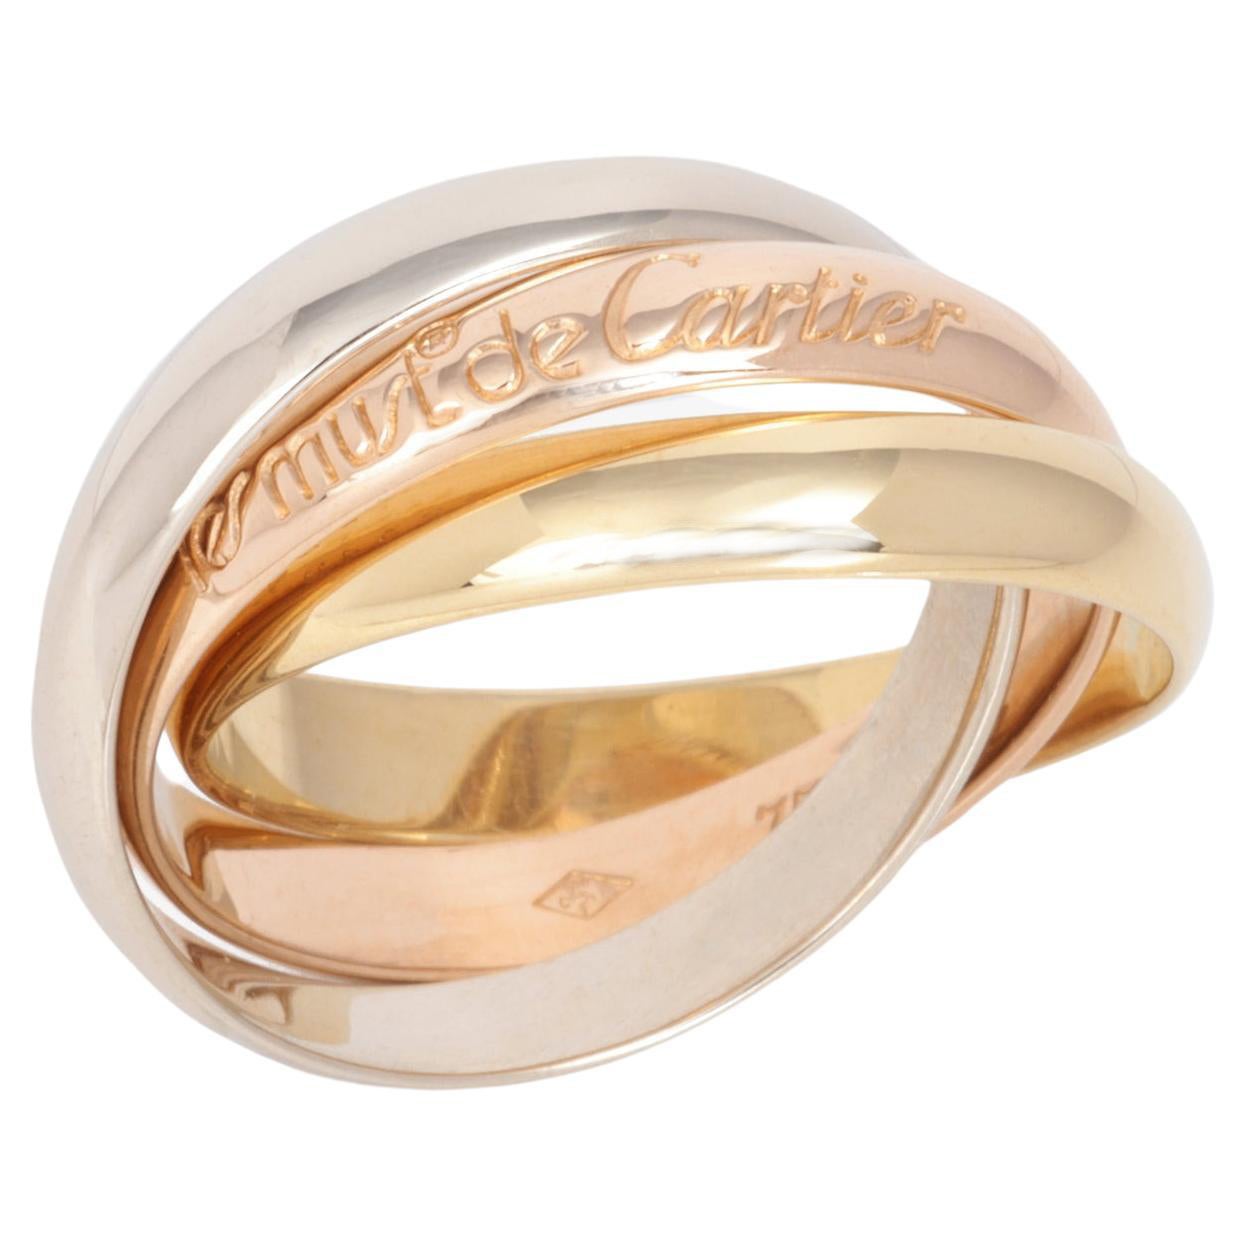 Cartier 18ct White, Yellow And Rose Gold Medium Les Must De Cartier Ring